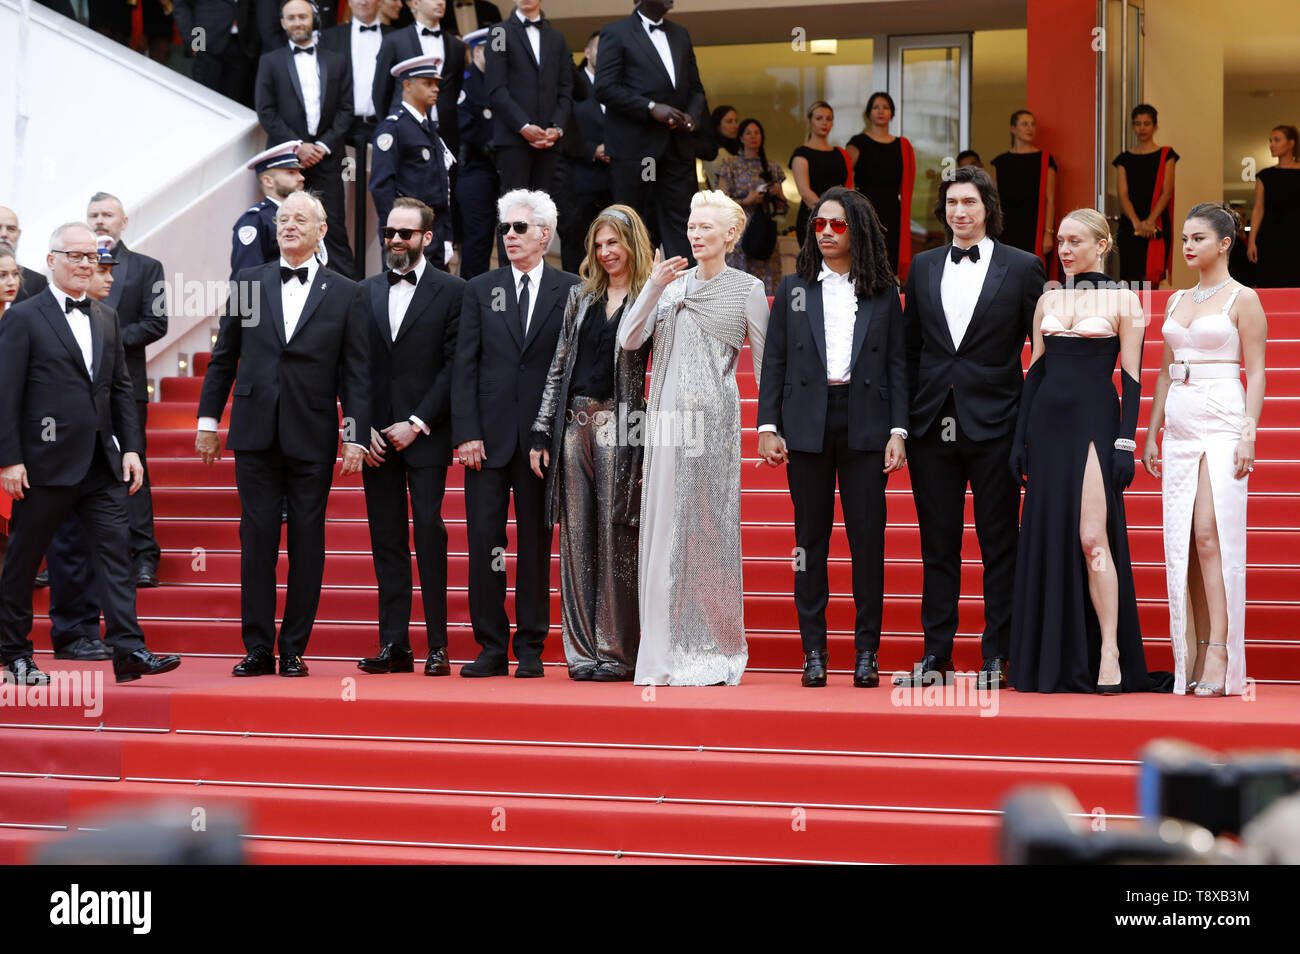 Thierry Fremaux, Bill Murray, Carter Logan, Jim Jarmusch, Sara Driver, Tilda Swinton, Luka Sabbat, Adam Driver, Chloe Sevigny and Selena Gomez attending the opening ceremony and screening of 'The Dead Don't Die' during the 72nd Cannes Film Festival at the Palais des Festivals on May 14, 2019 in Cannes, France | usage worldwide Stock Photo